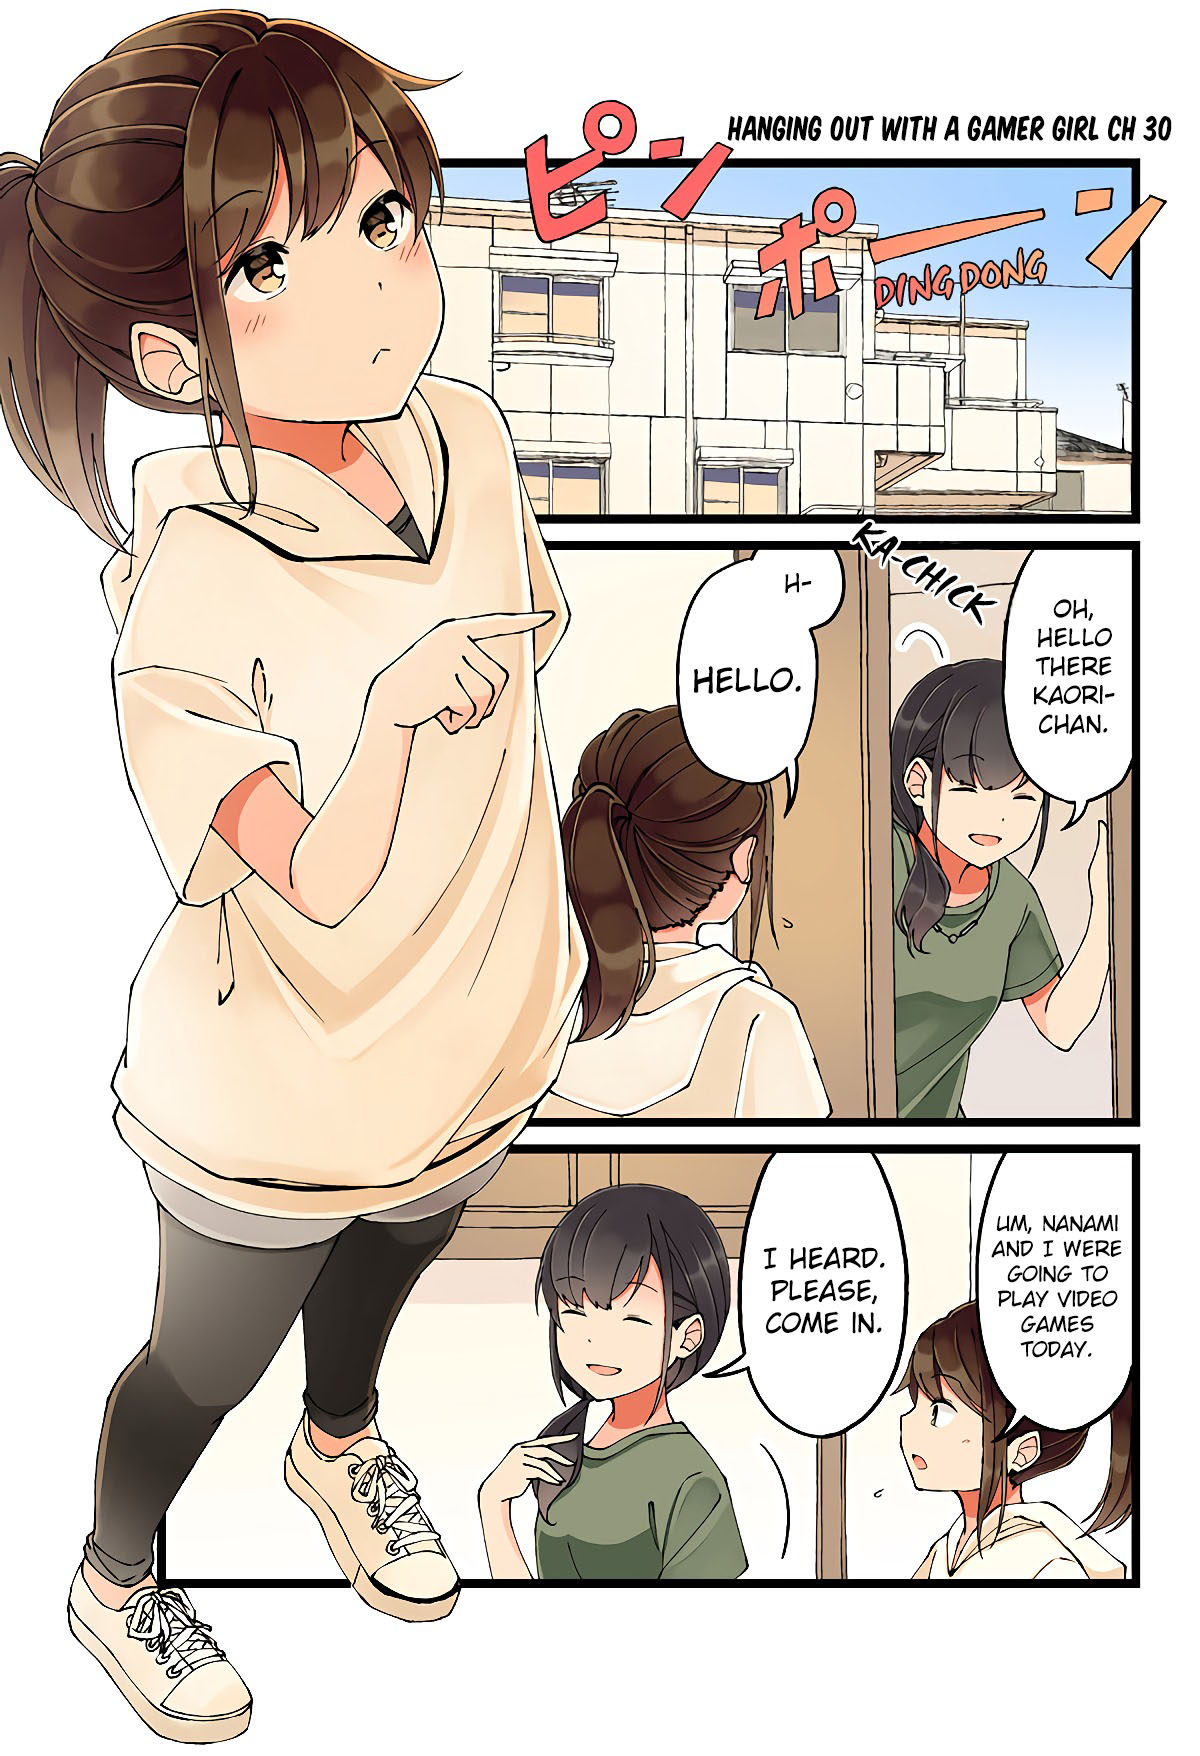 Hanging Out with a Gamer Girl Ch. 30